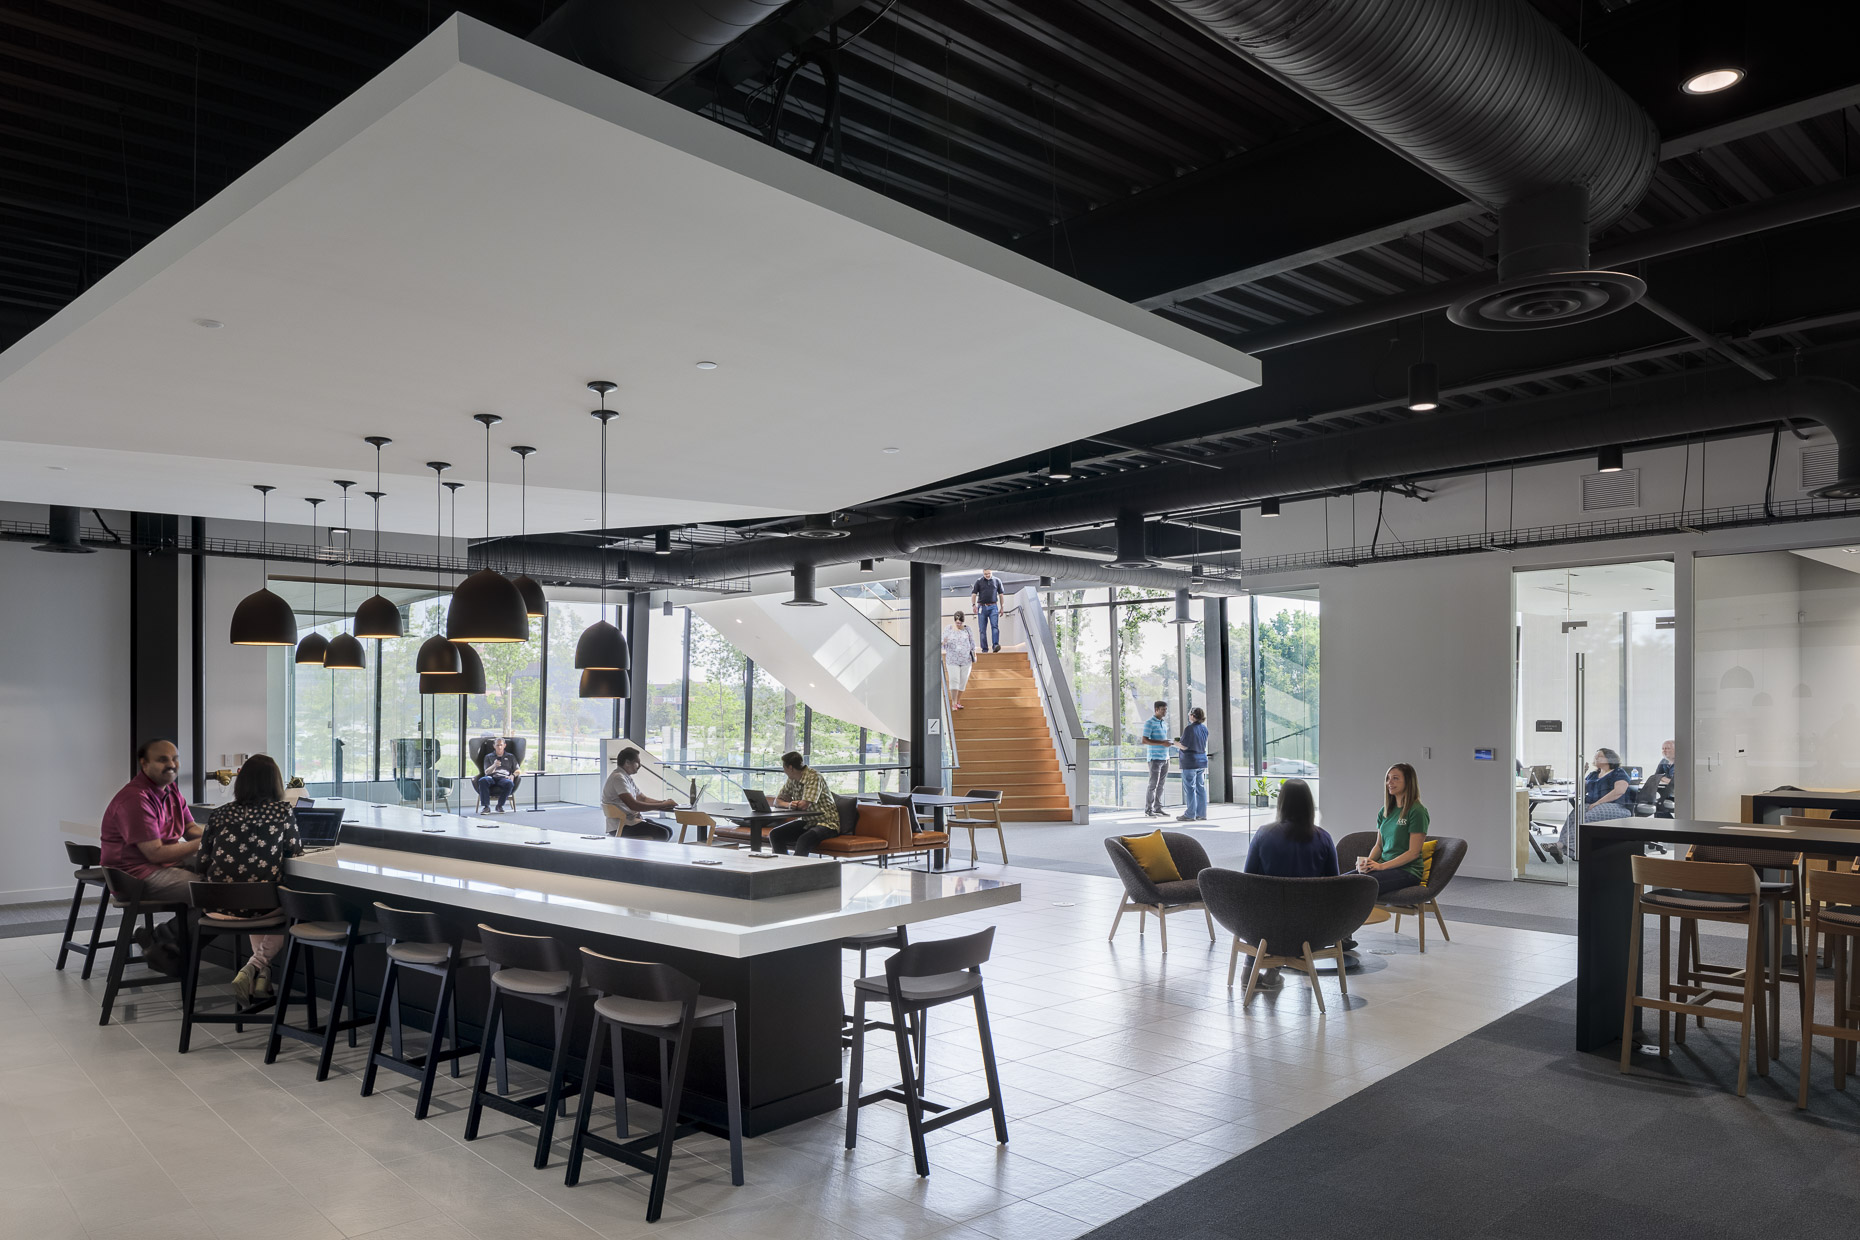 KAR Global Headquarters by Ratio Architects photographed by Brad Feinknopf based in Columbus, Ohio